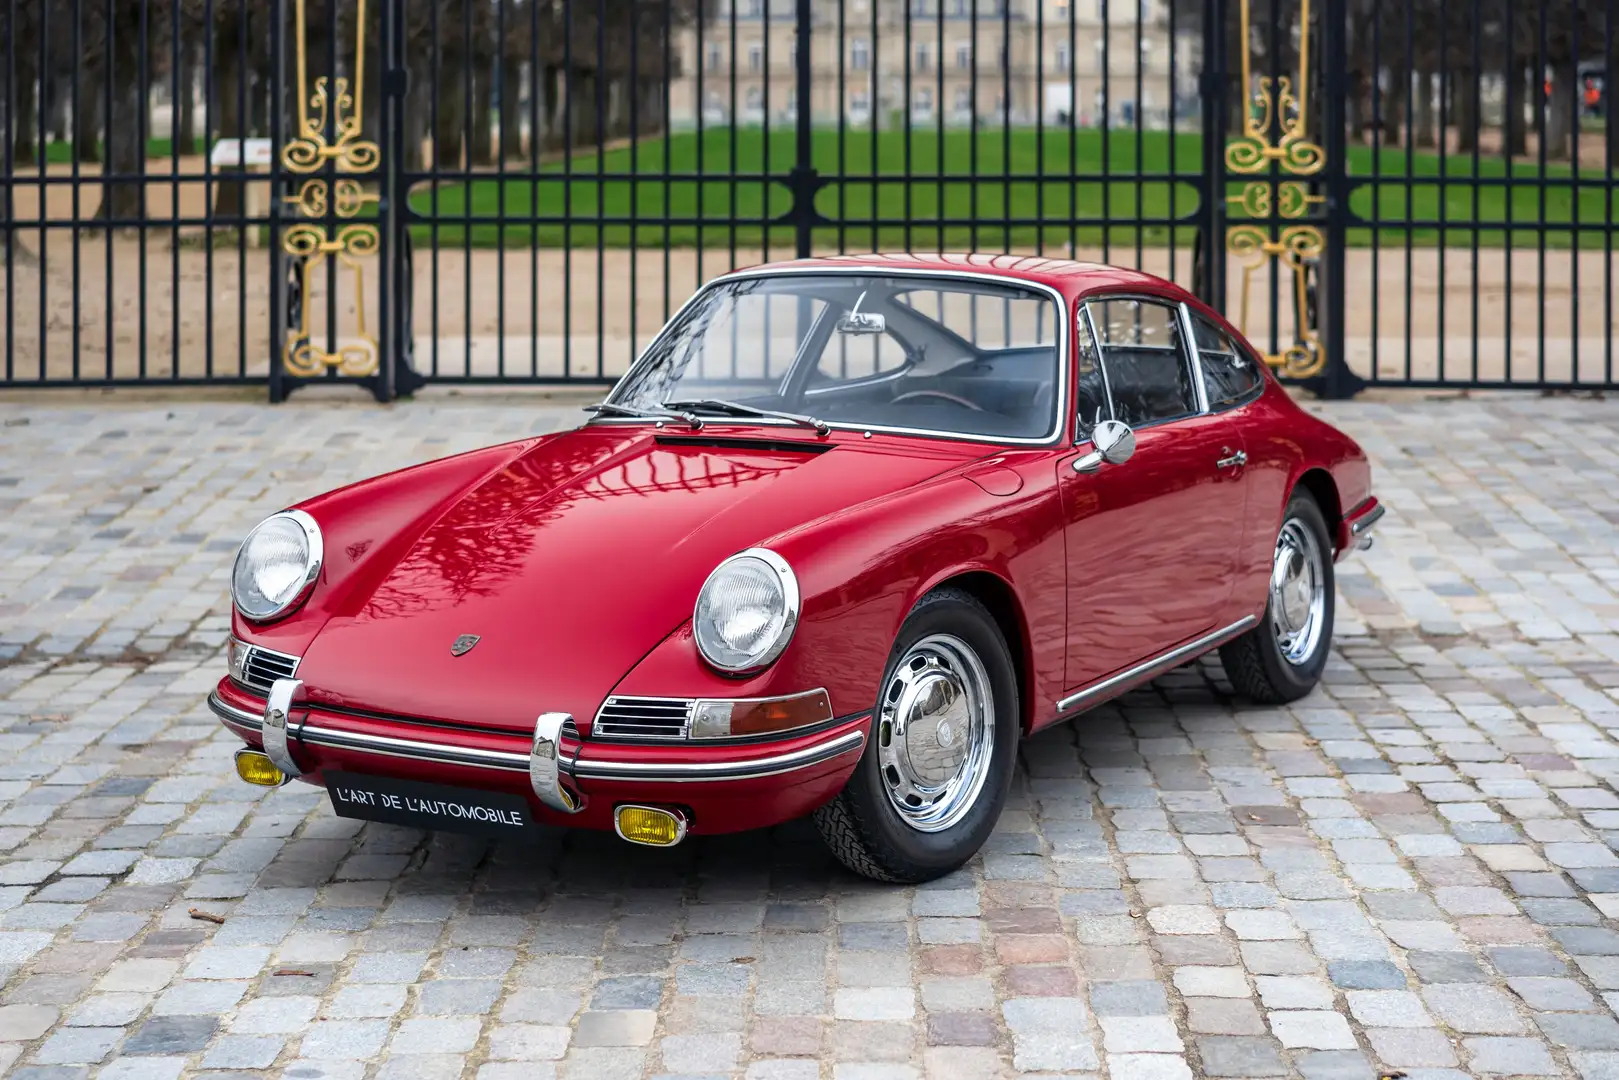 Porsche 911 2.0 1964 - the 136th ever produced, fully restored Rouge - 1